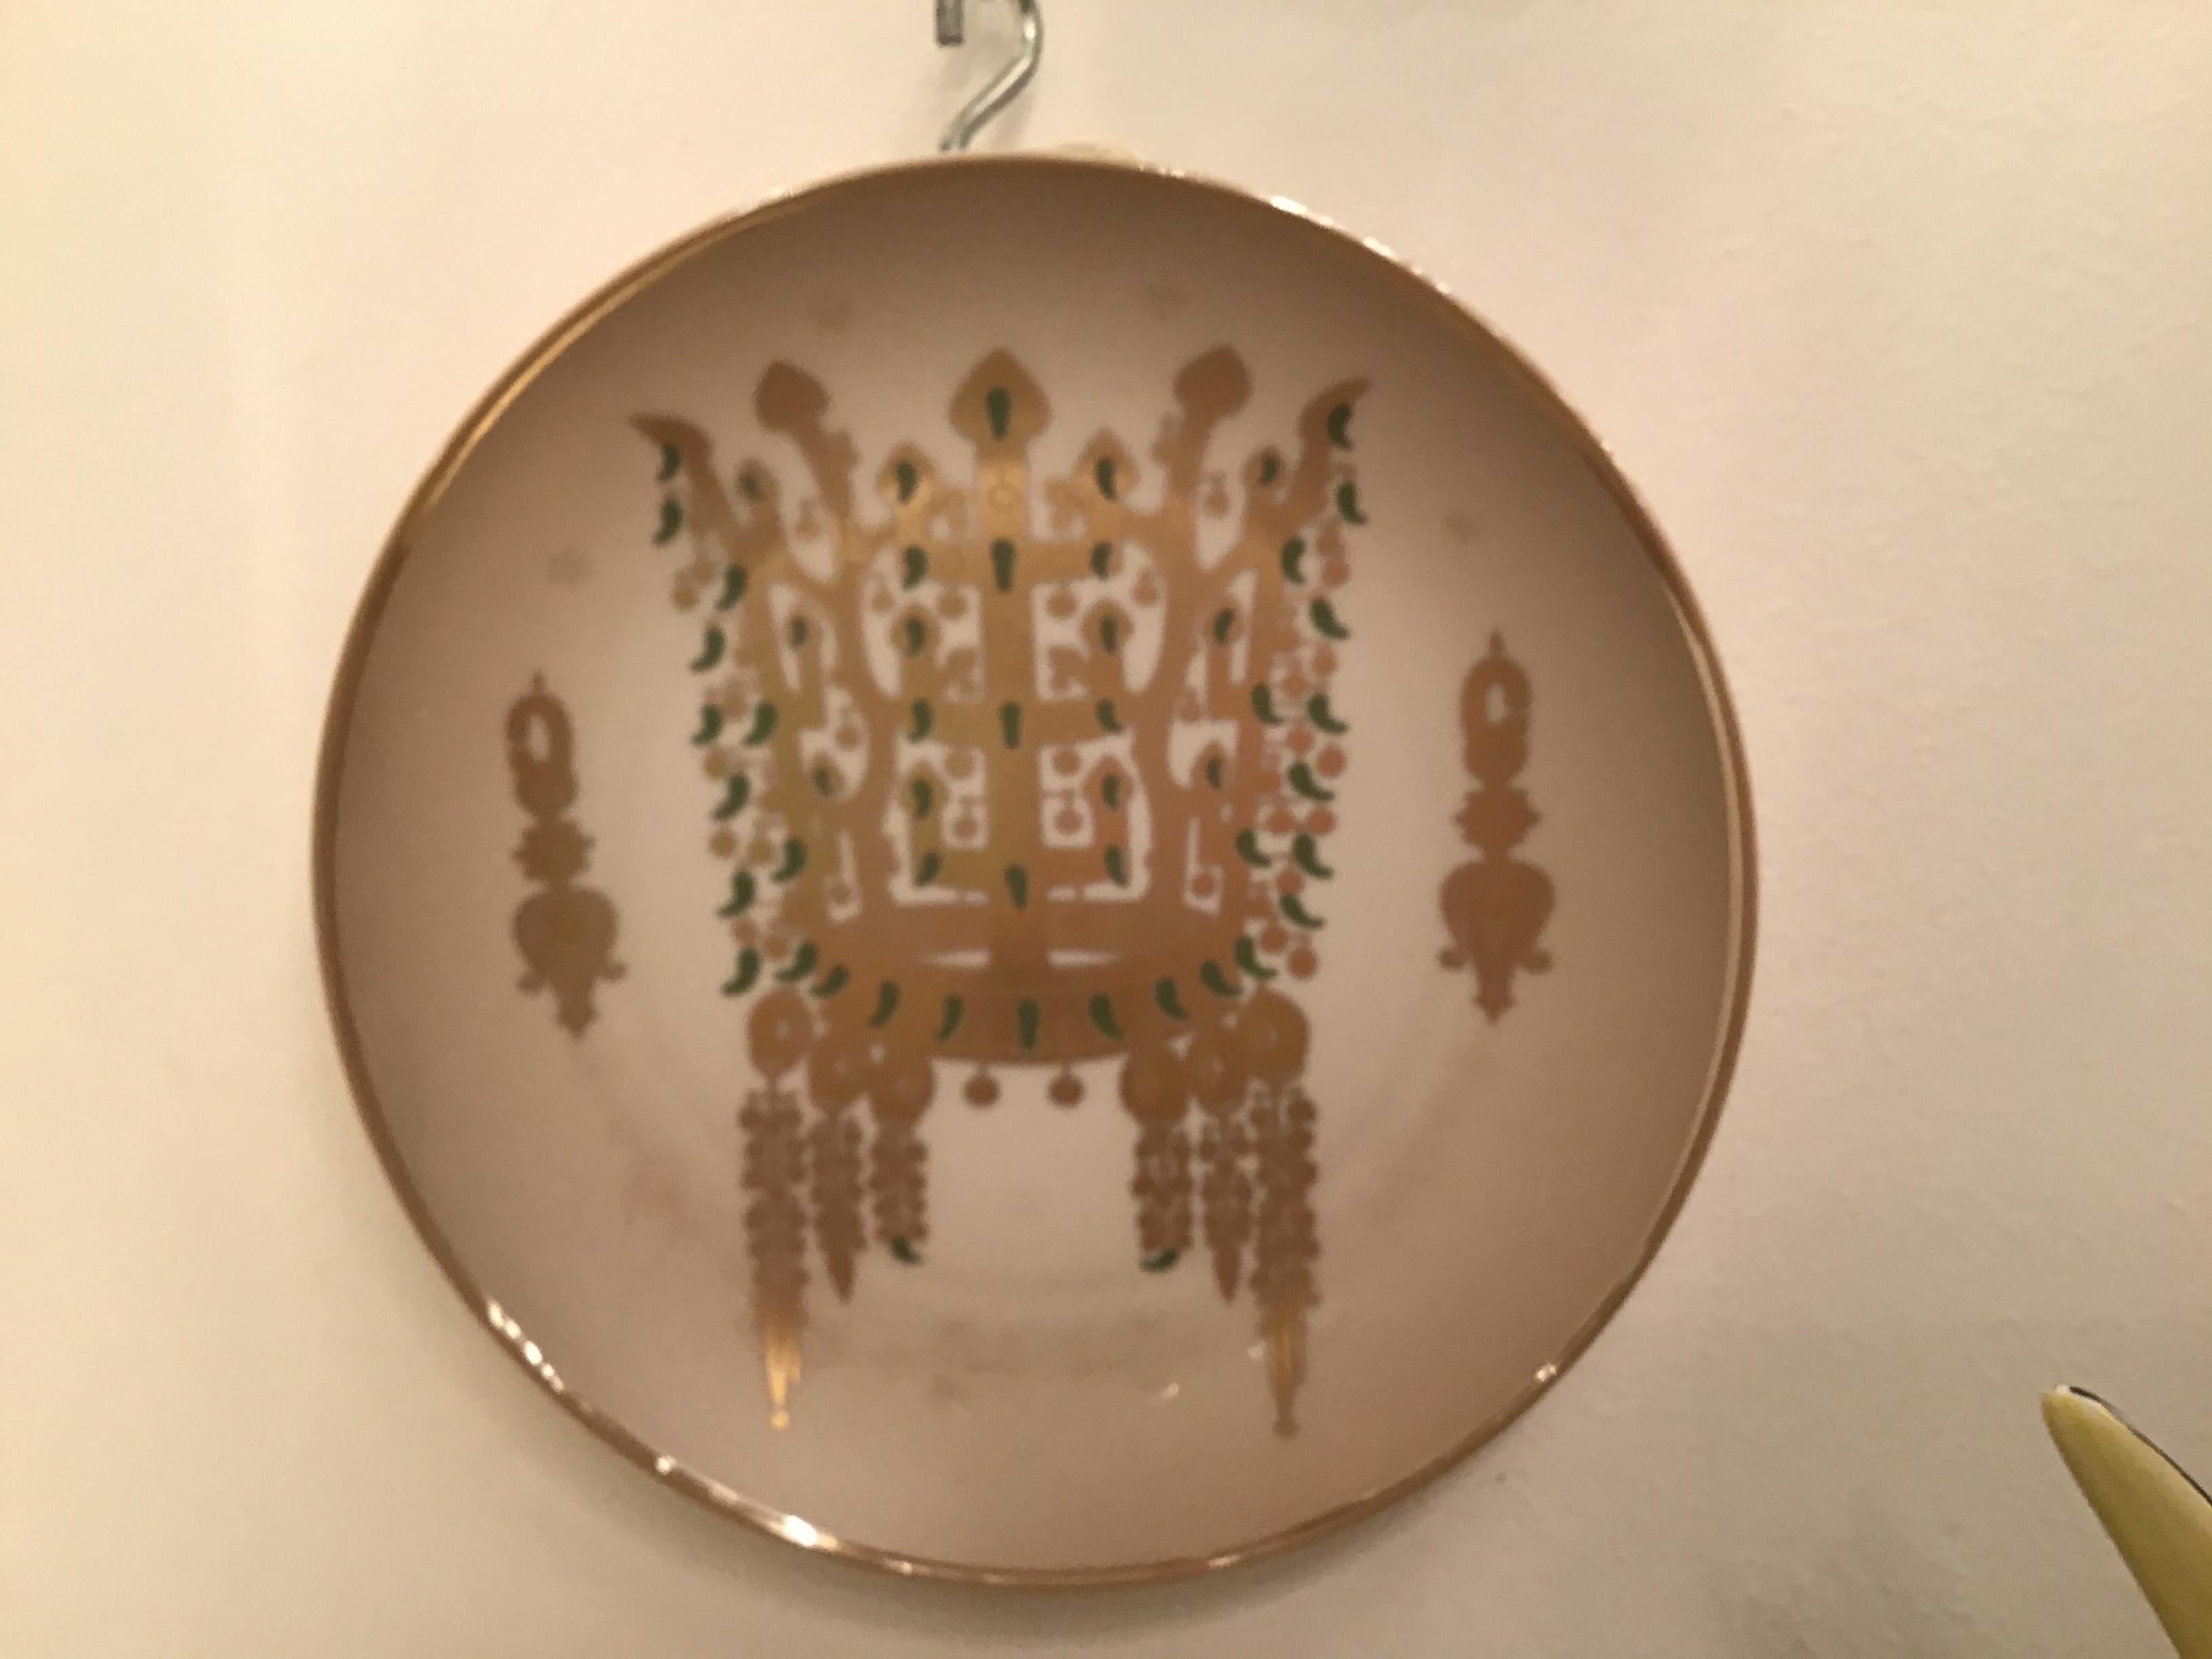 Morbelli Porcelain “Dinastia Silla” Wall Plates Worked with Pure Gold 1960 Italy For Sale 2